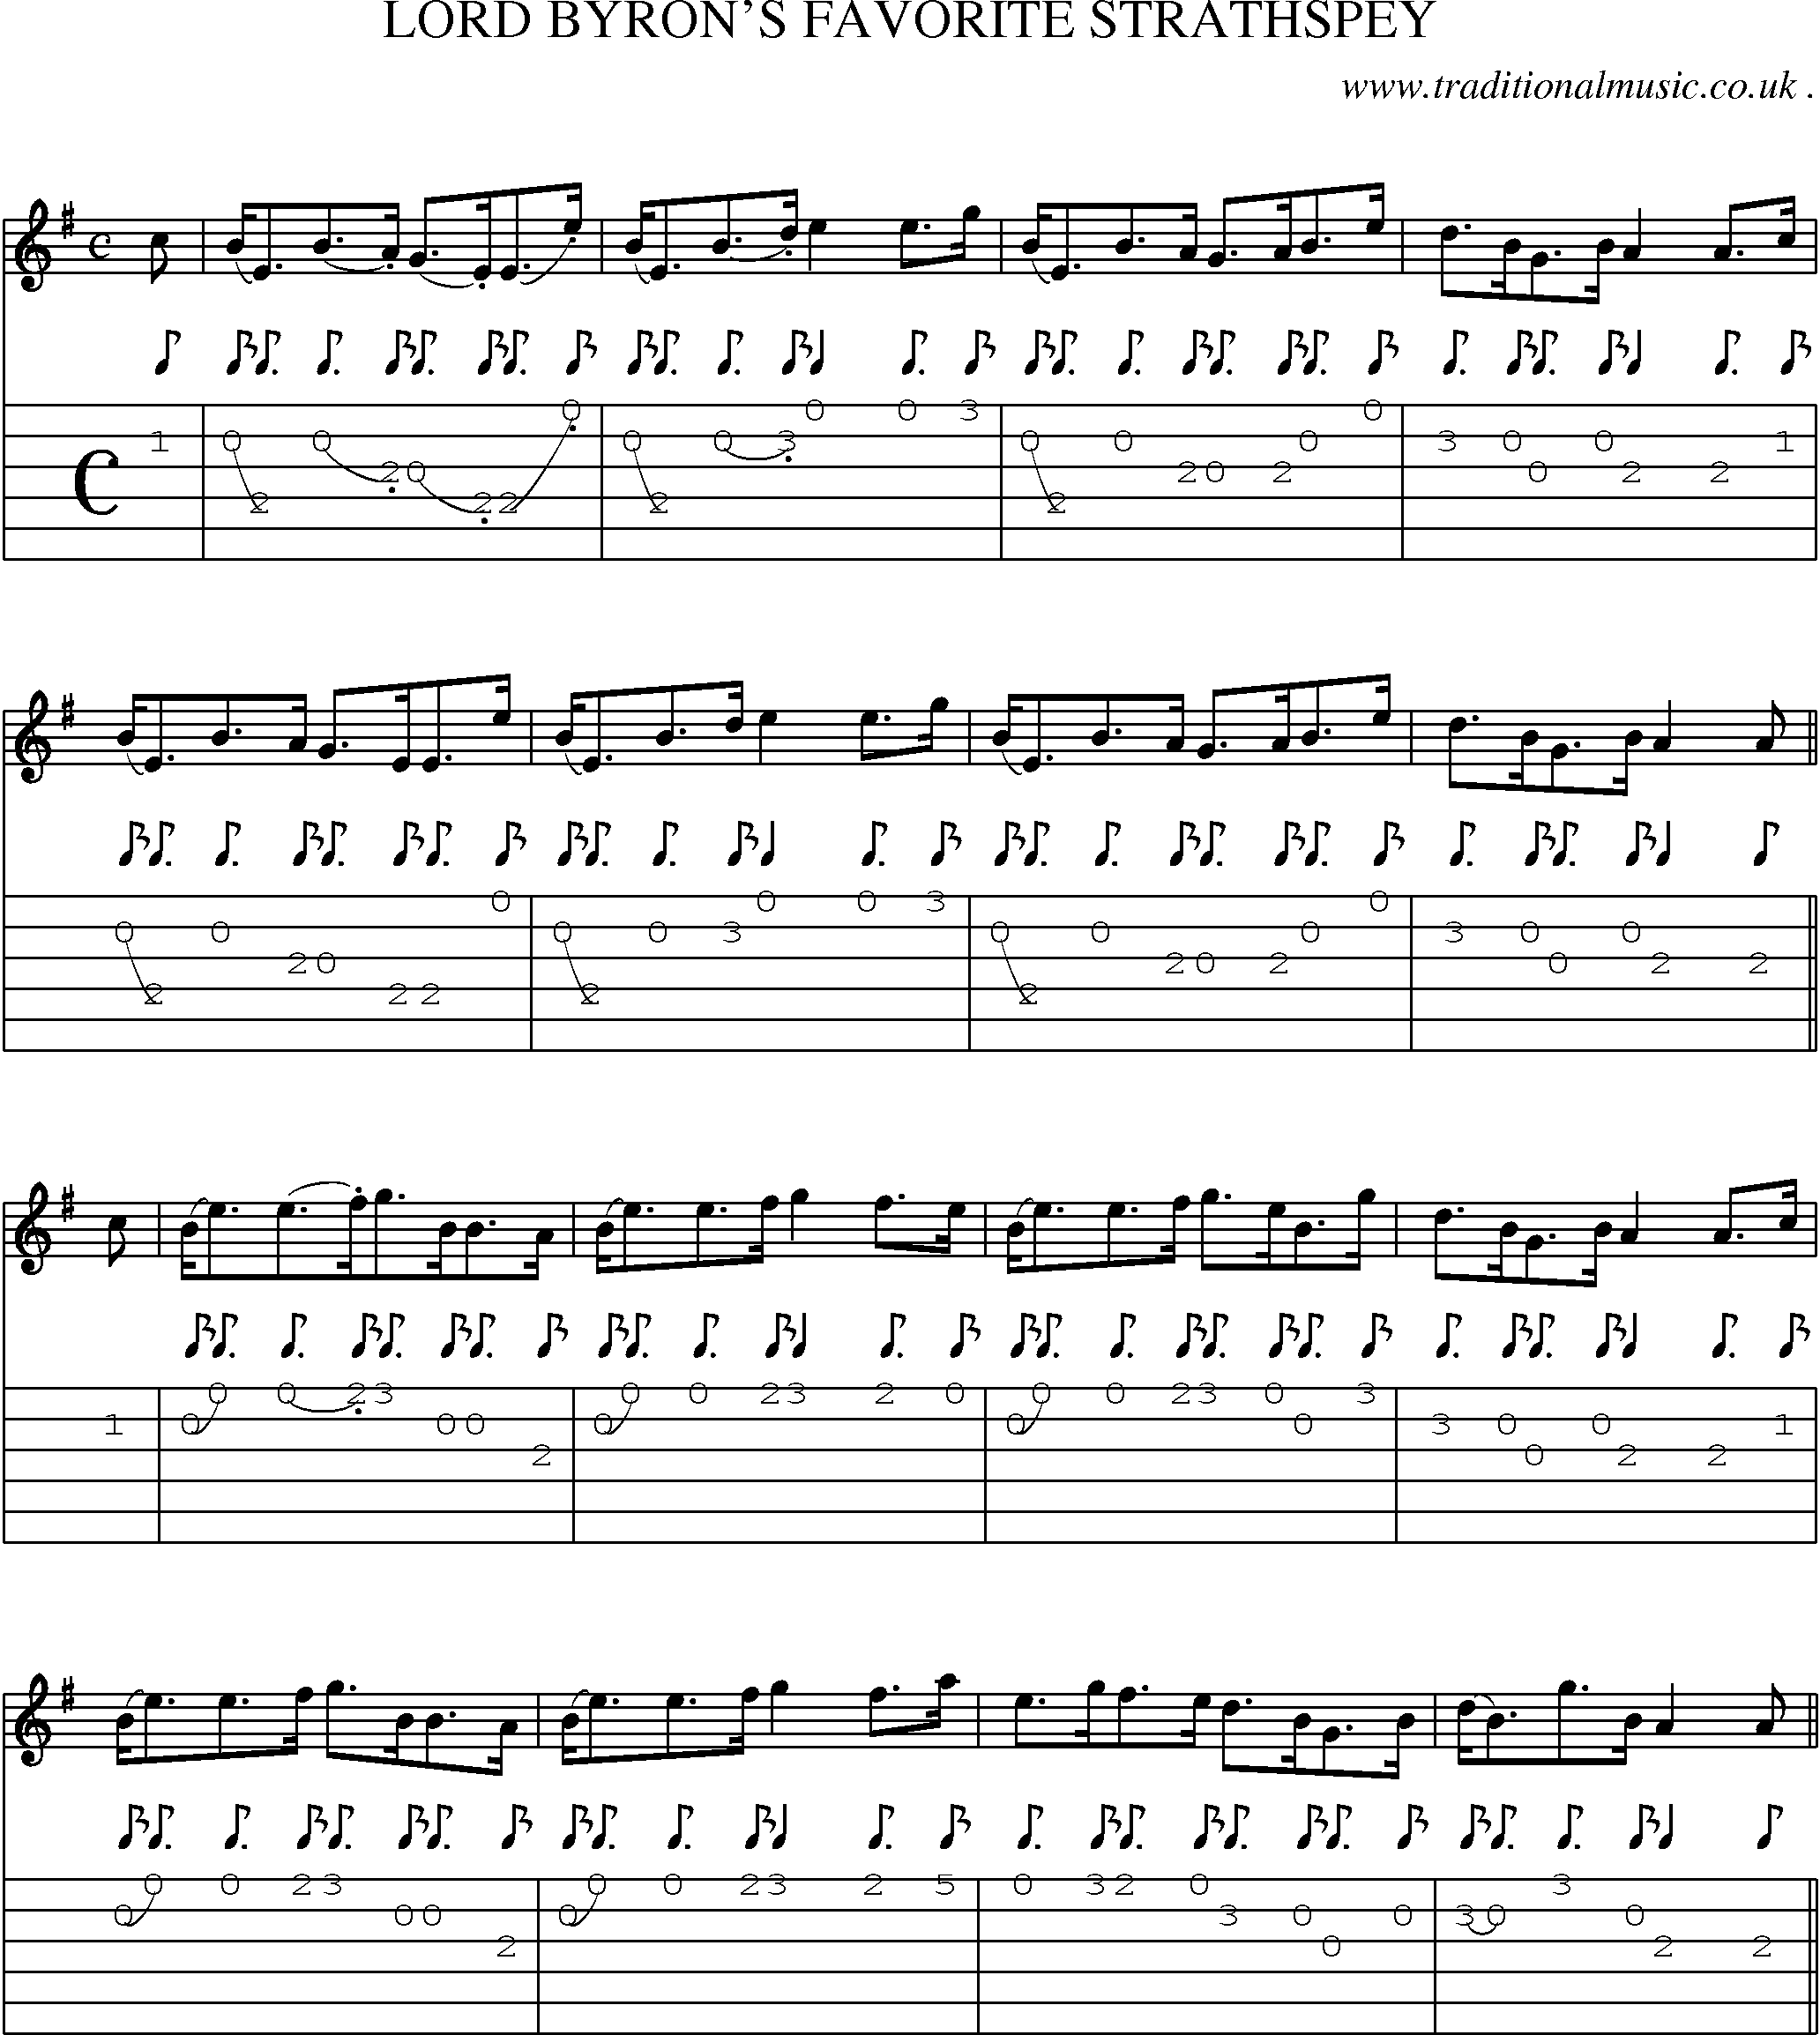 Sheet-Music and Guitar Tabs for Lord Byrons Favorite Strathspey